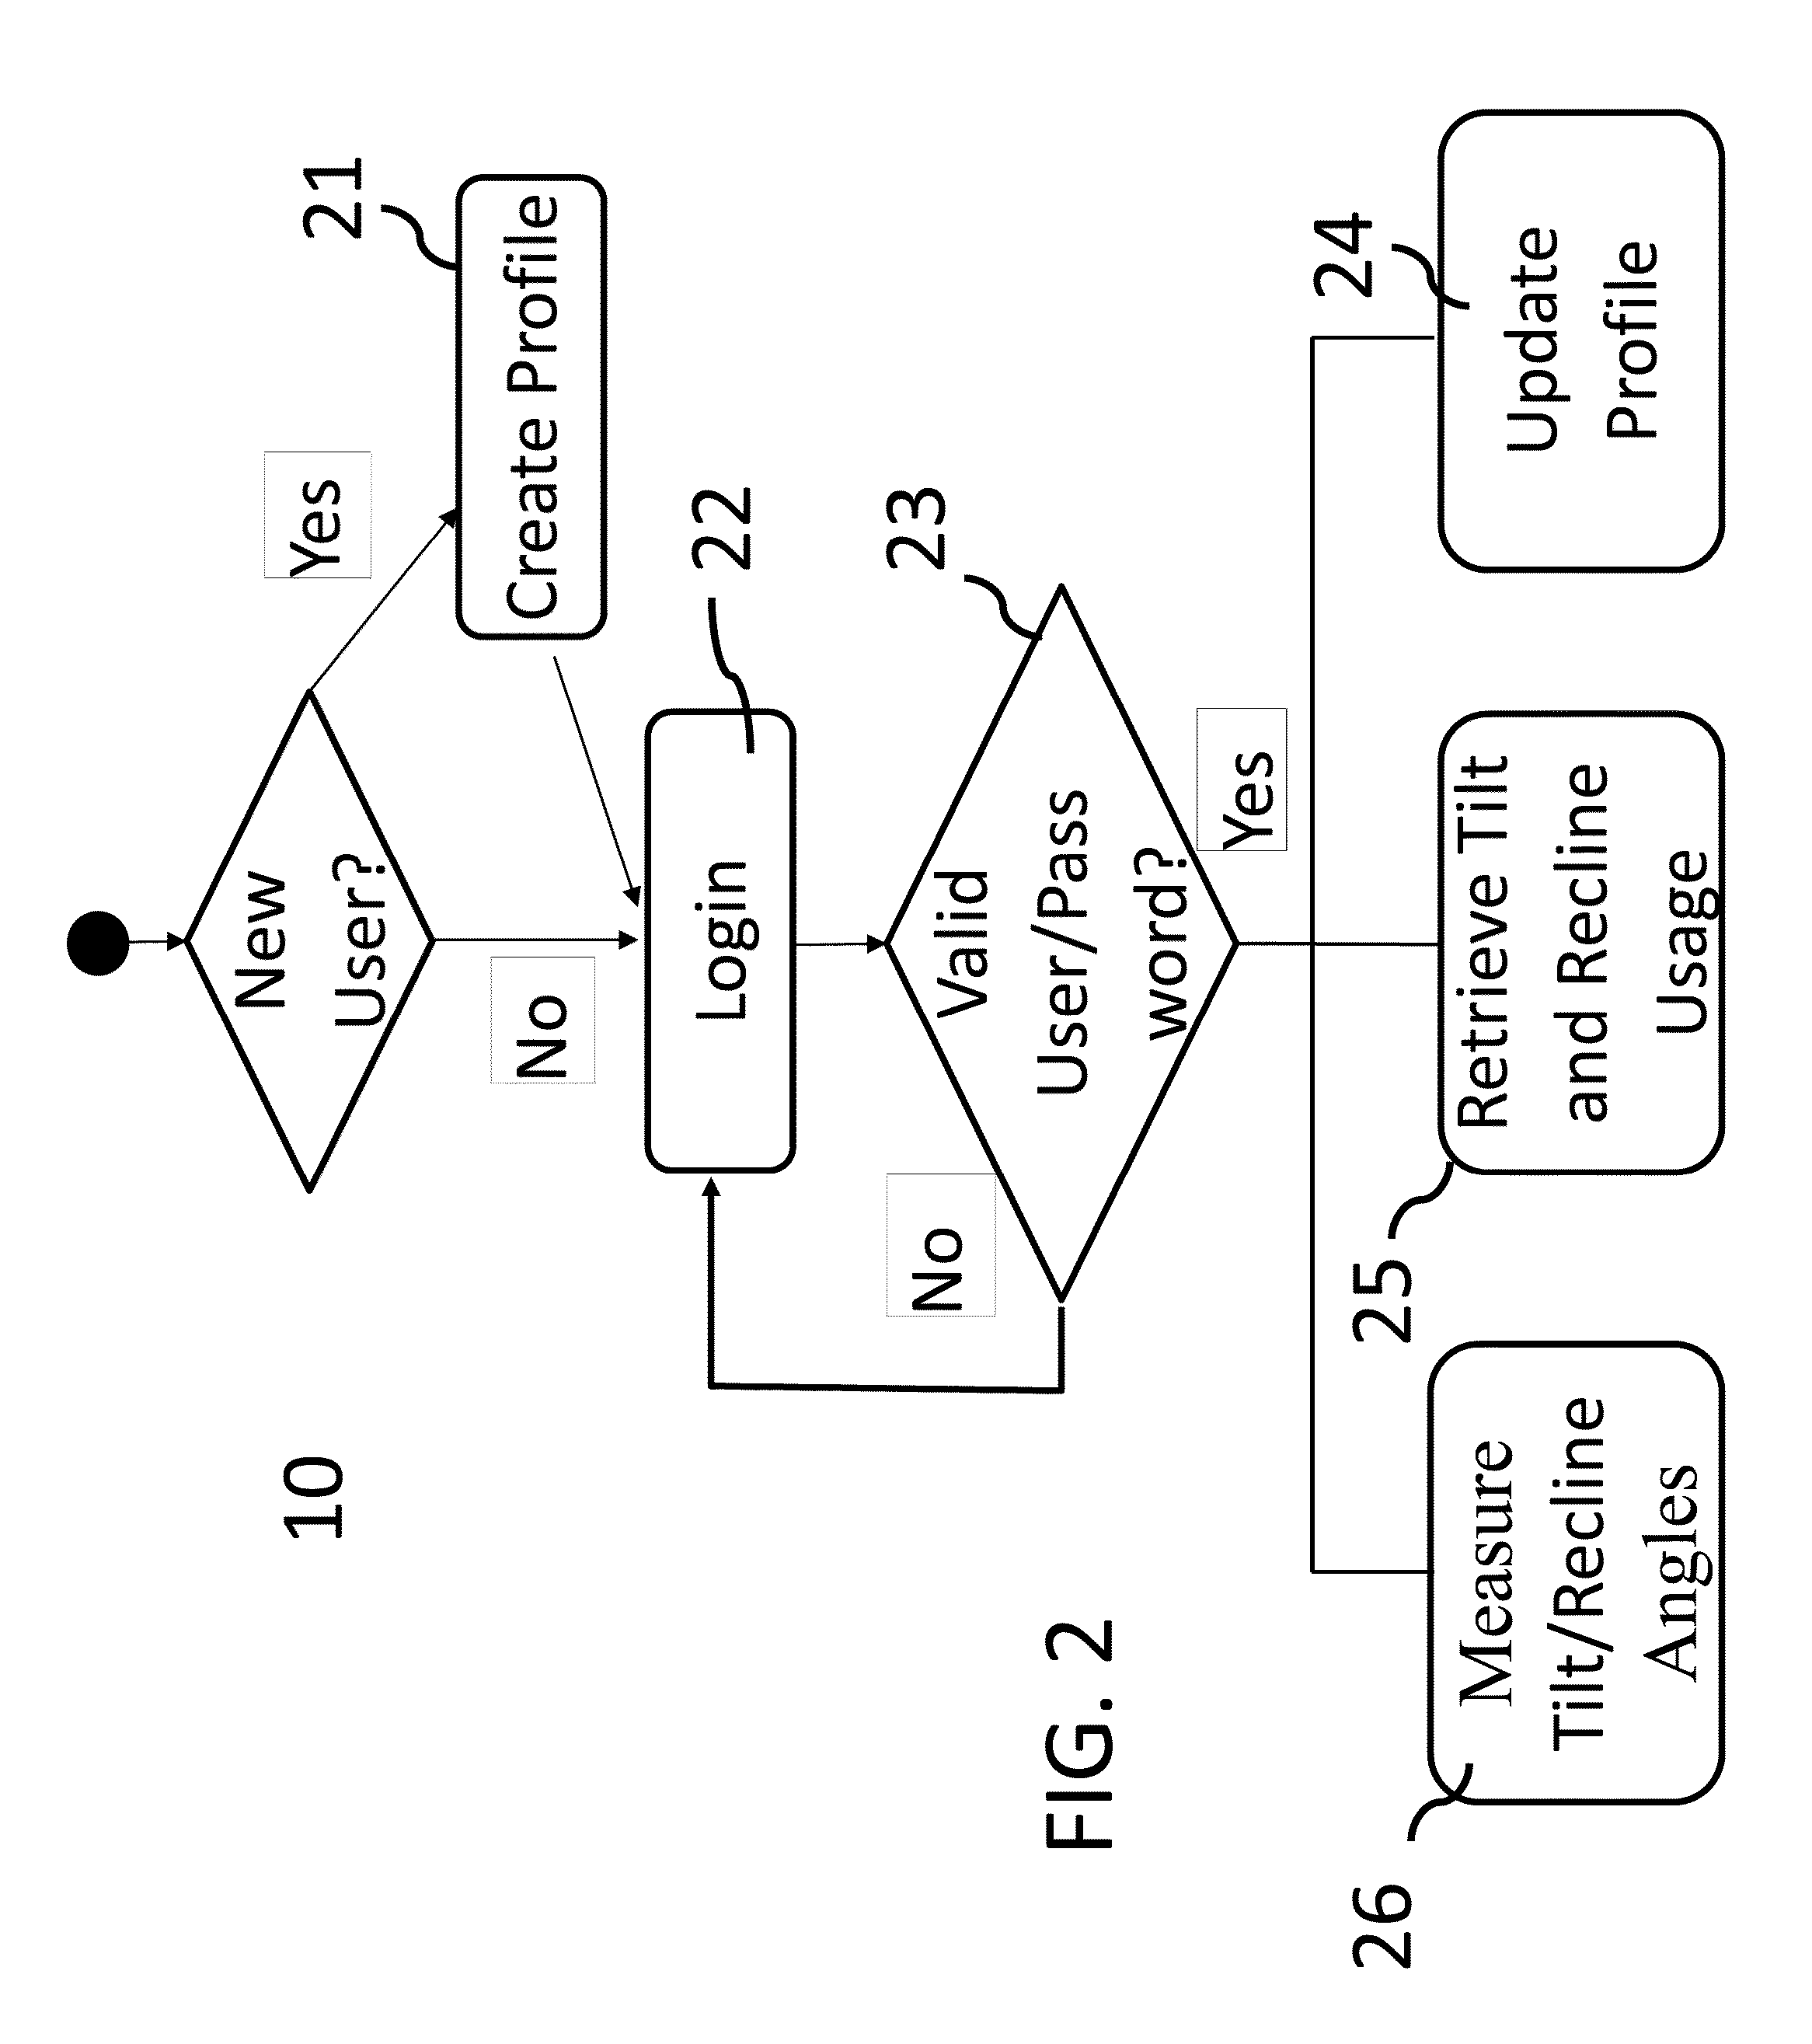 Intelligent apparatus for providing personalized configuration of wheelchair tilt and recline